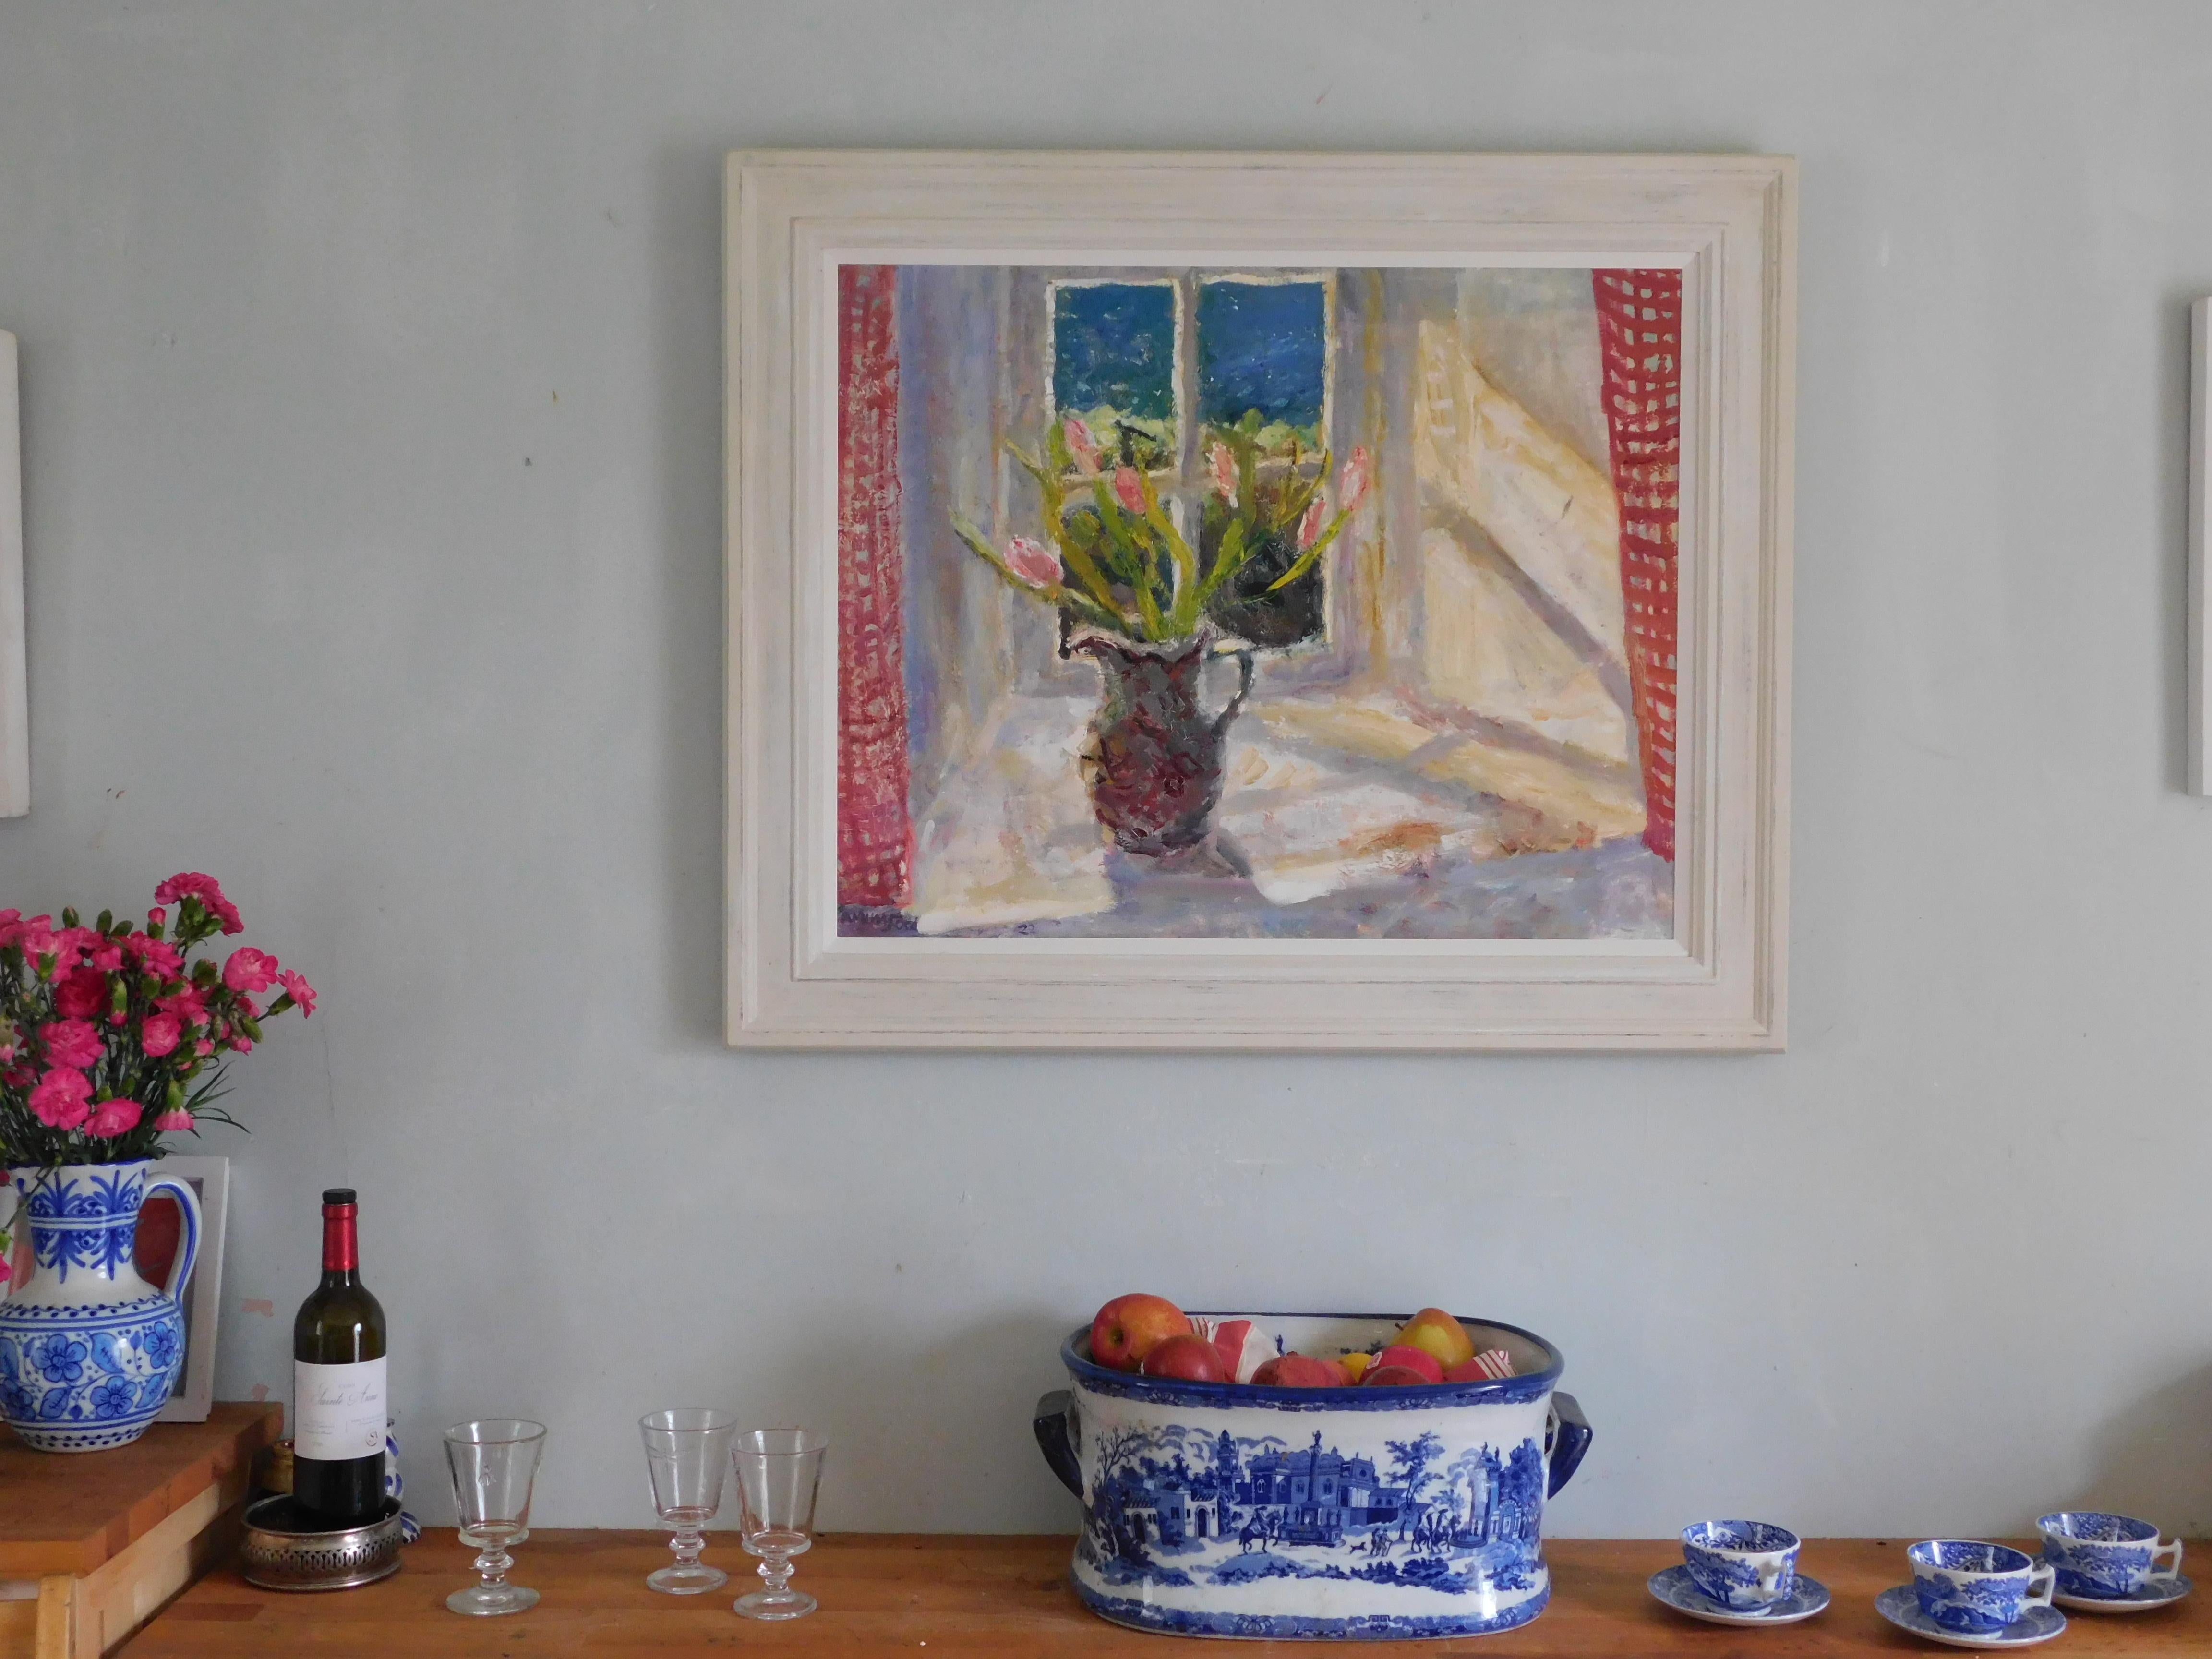 Seaward Window and Gingham Curtains. Contemporary Still Life Oil Painting For Sale 2